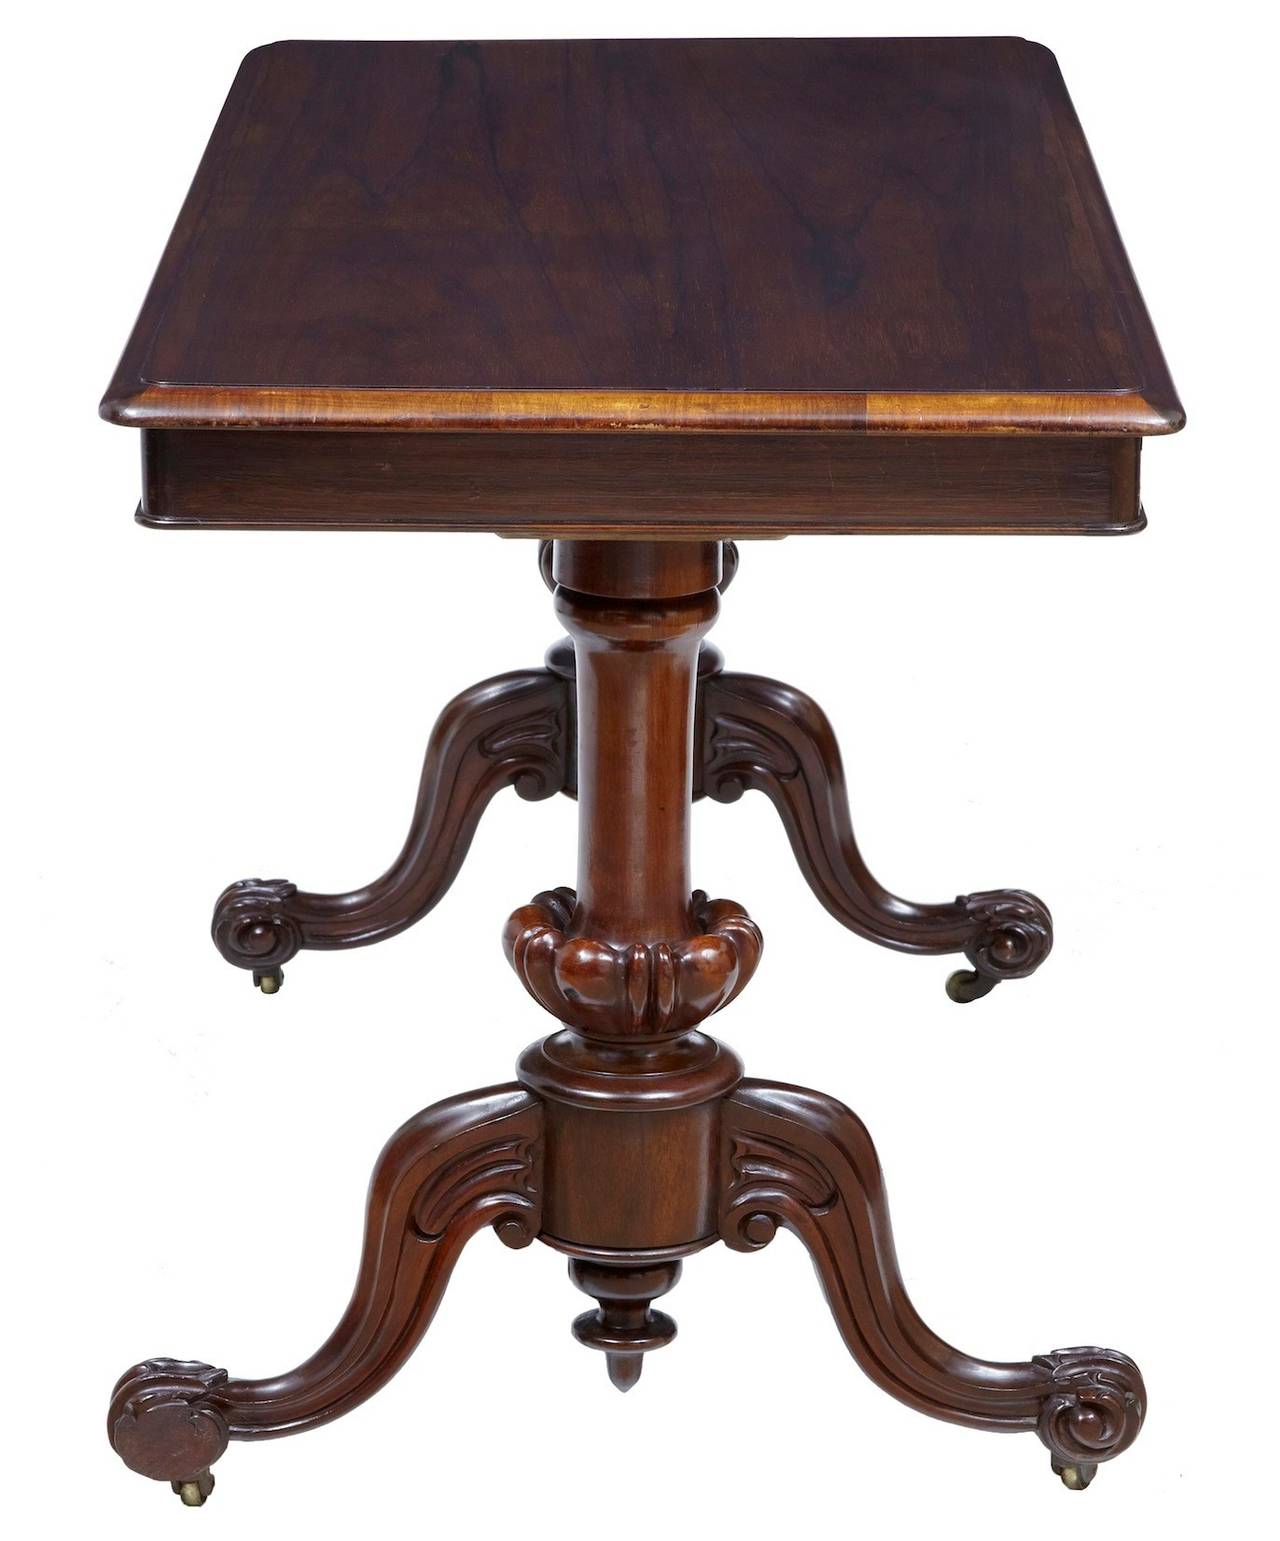 19th century carved rosewood writing table

Early Victorian rosewood writing table, circa 1850.

Good color with the striking rosewood patina.

Turned legs on carved scrolled feet.

One piece of carving missing off foot (photographed) marks